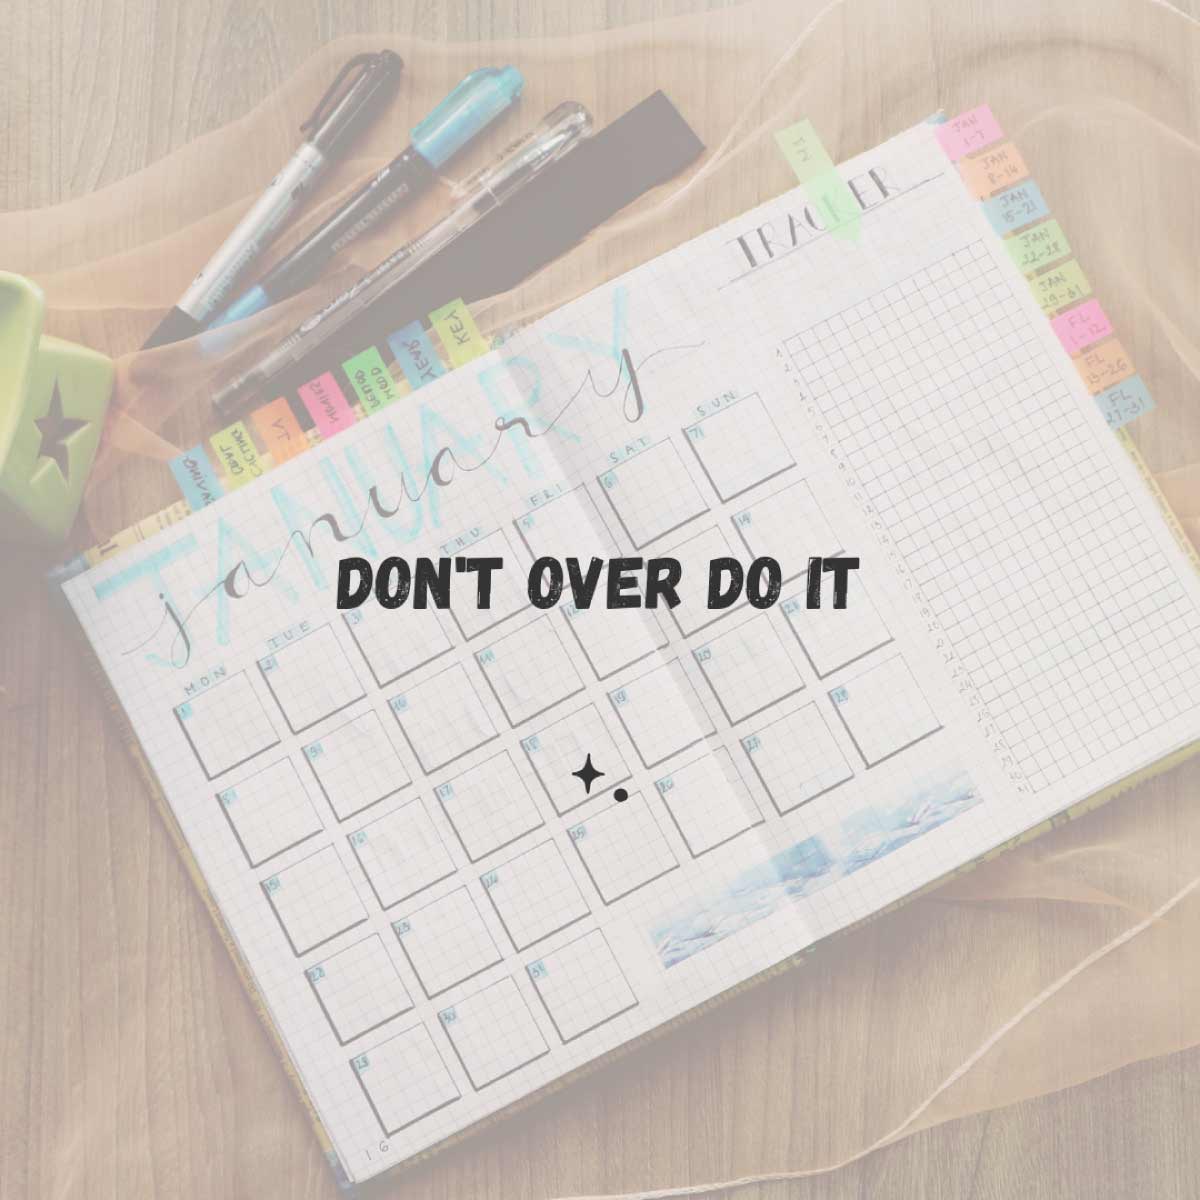 Don't over do it. Journal open to a hand drawn calendar.